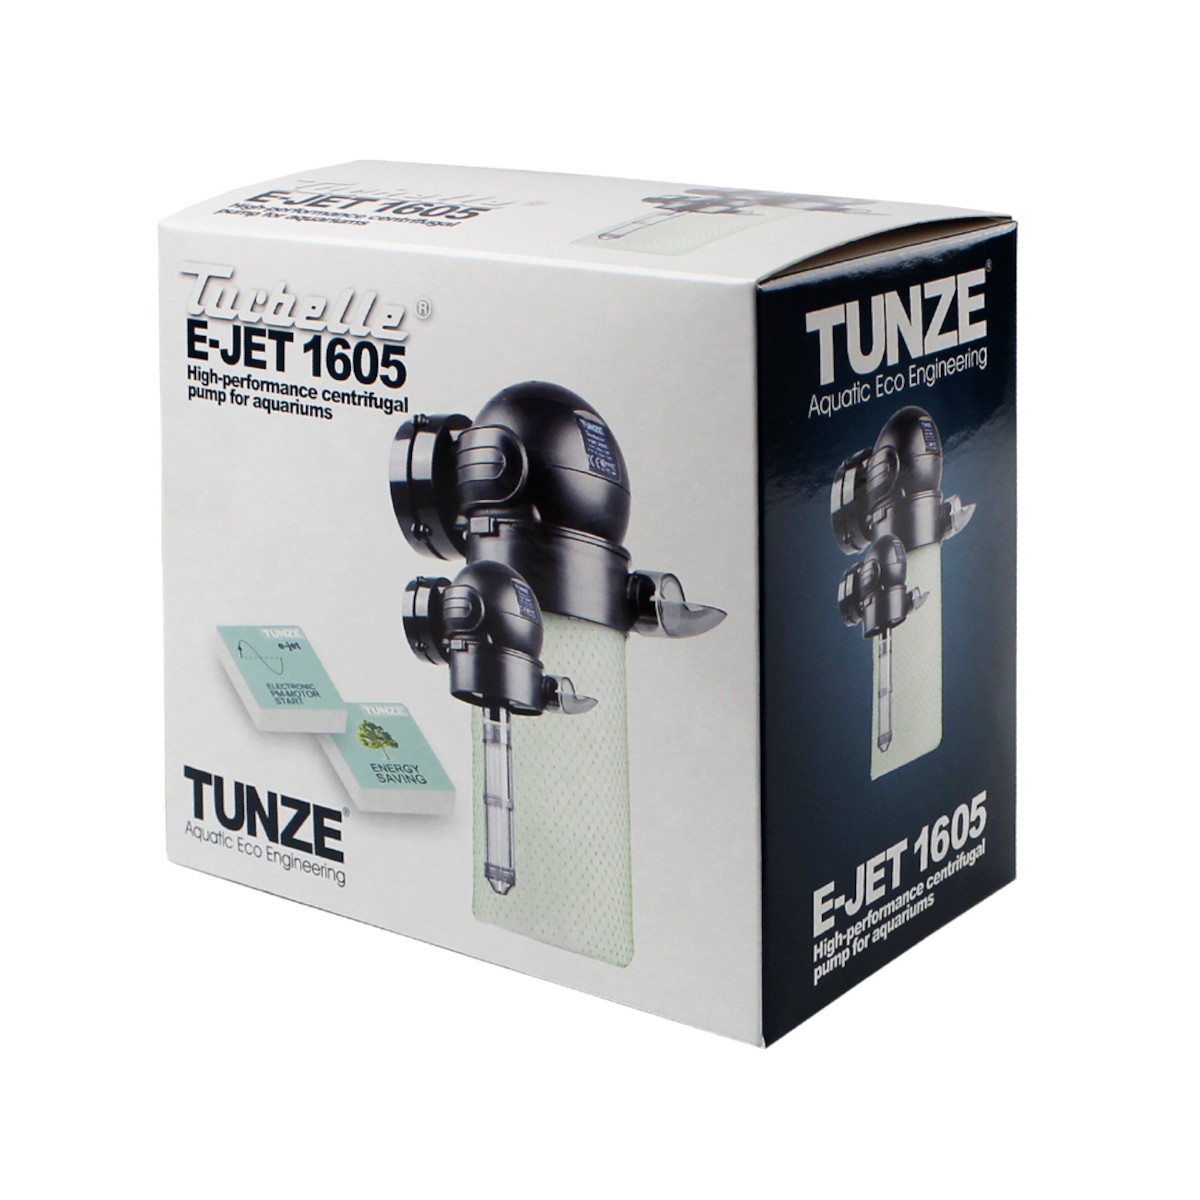 Tunze Turbelle e-jet 1605 Verpackung